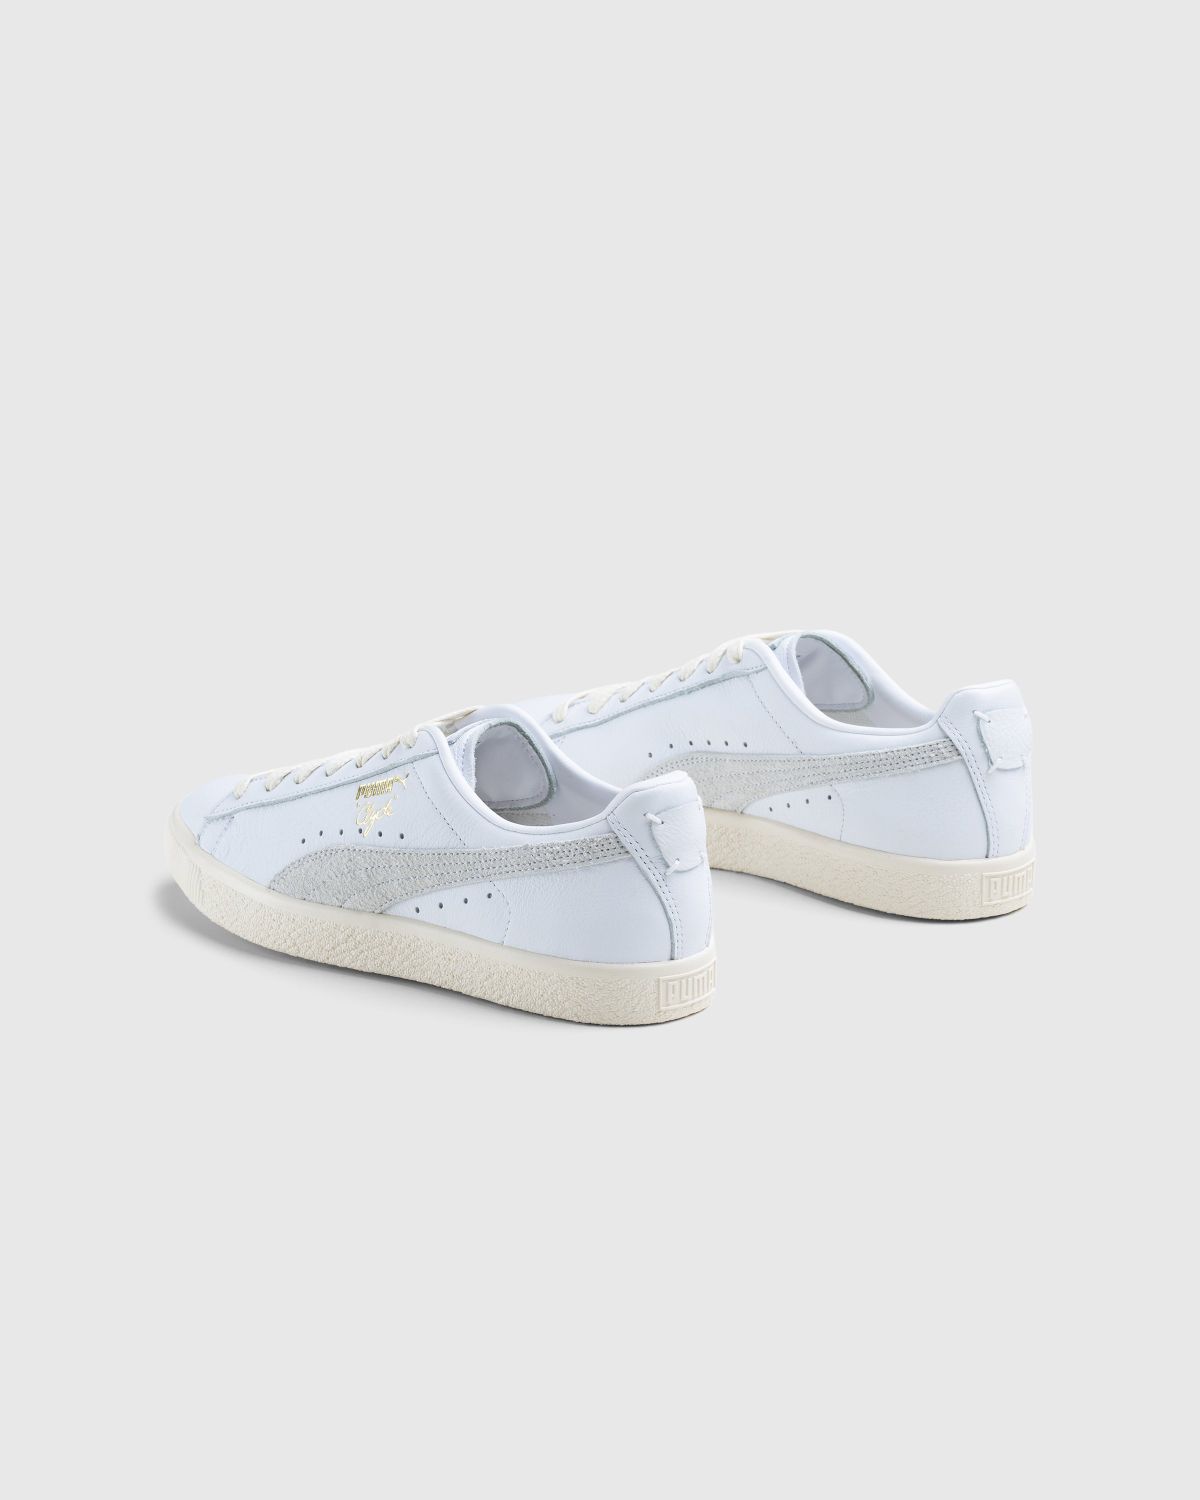 Puma – Clyde Base White - Sneakers - White - Image 4